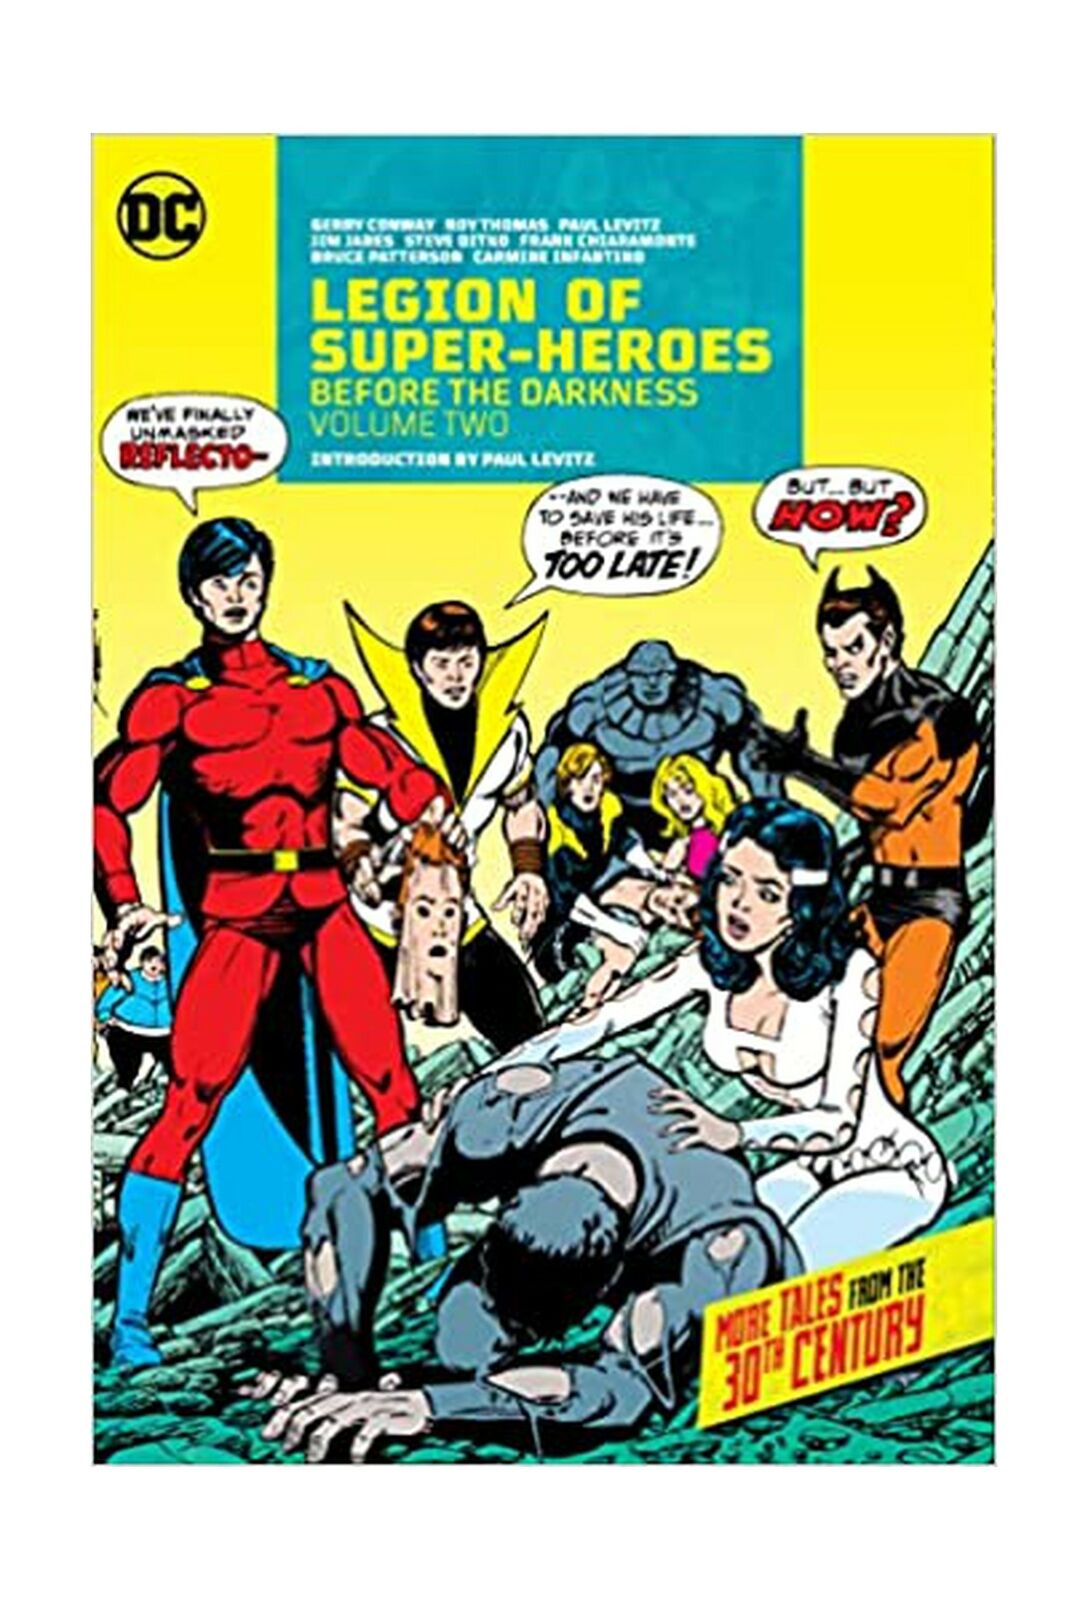 Legion of Super-Heroes: Before the Darkness Vol. 2 (Legion of Super-heroes: B...